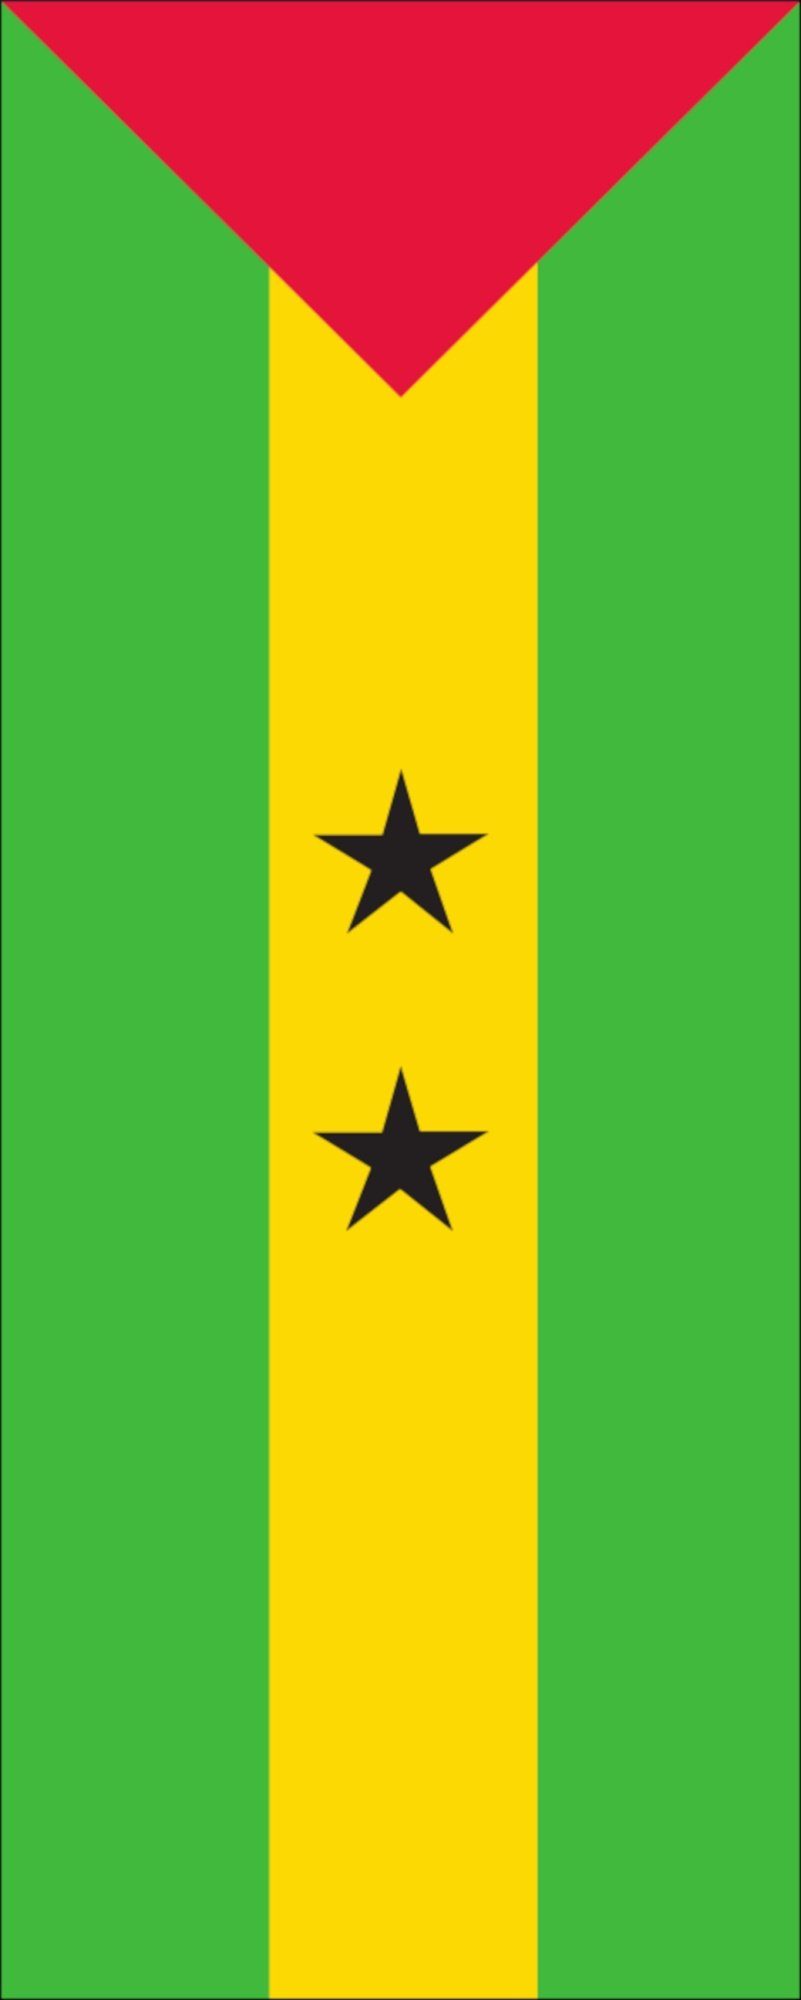 flaggenmeer Flagge Flagge Sao Tome und Principe 110 g/m² Hochformat